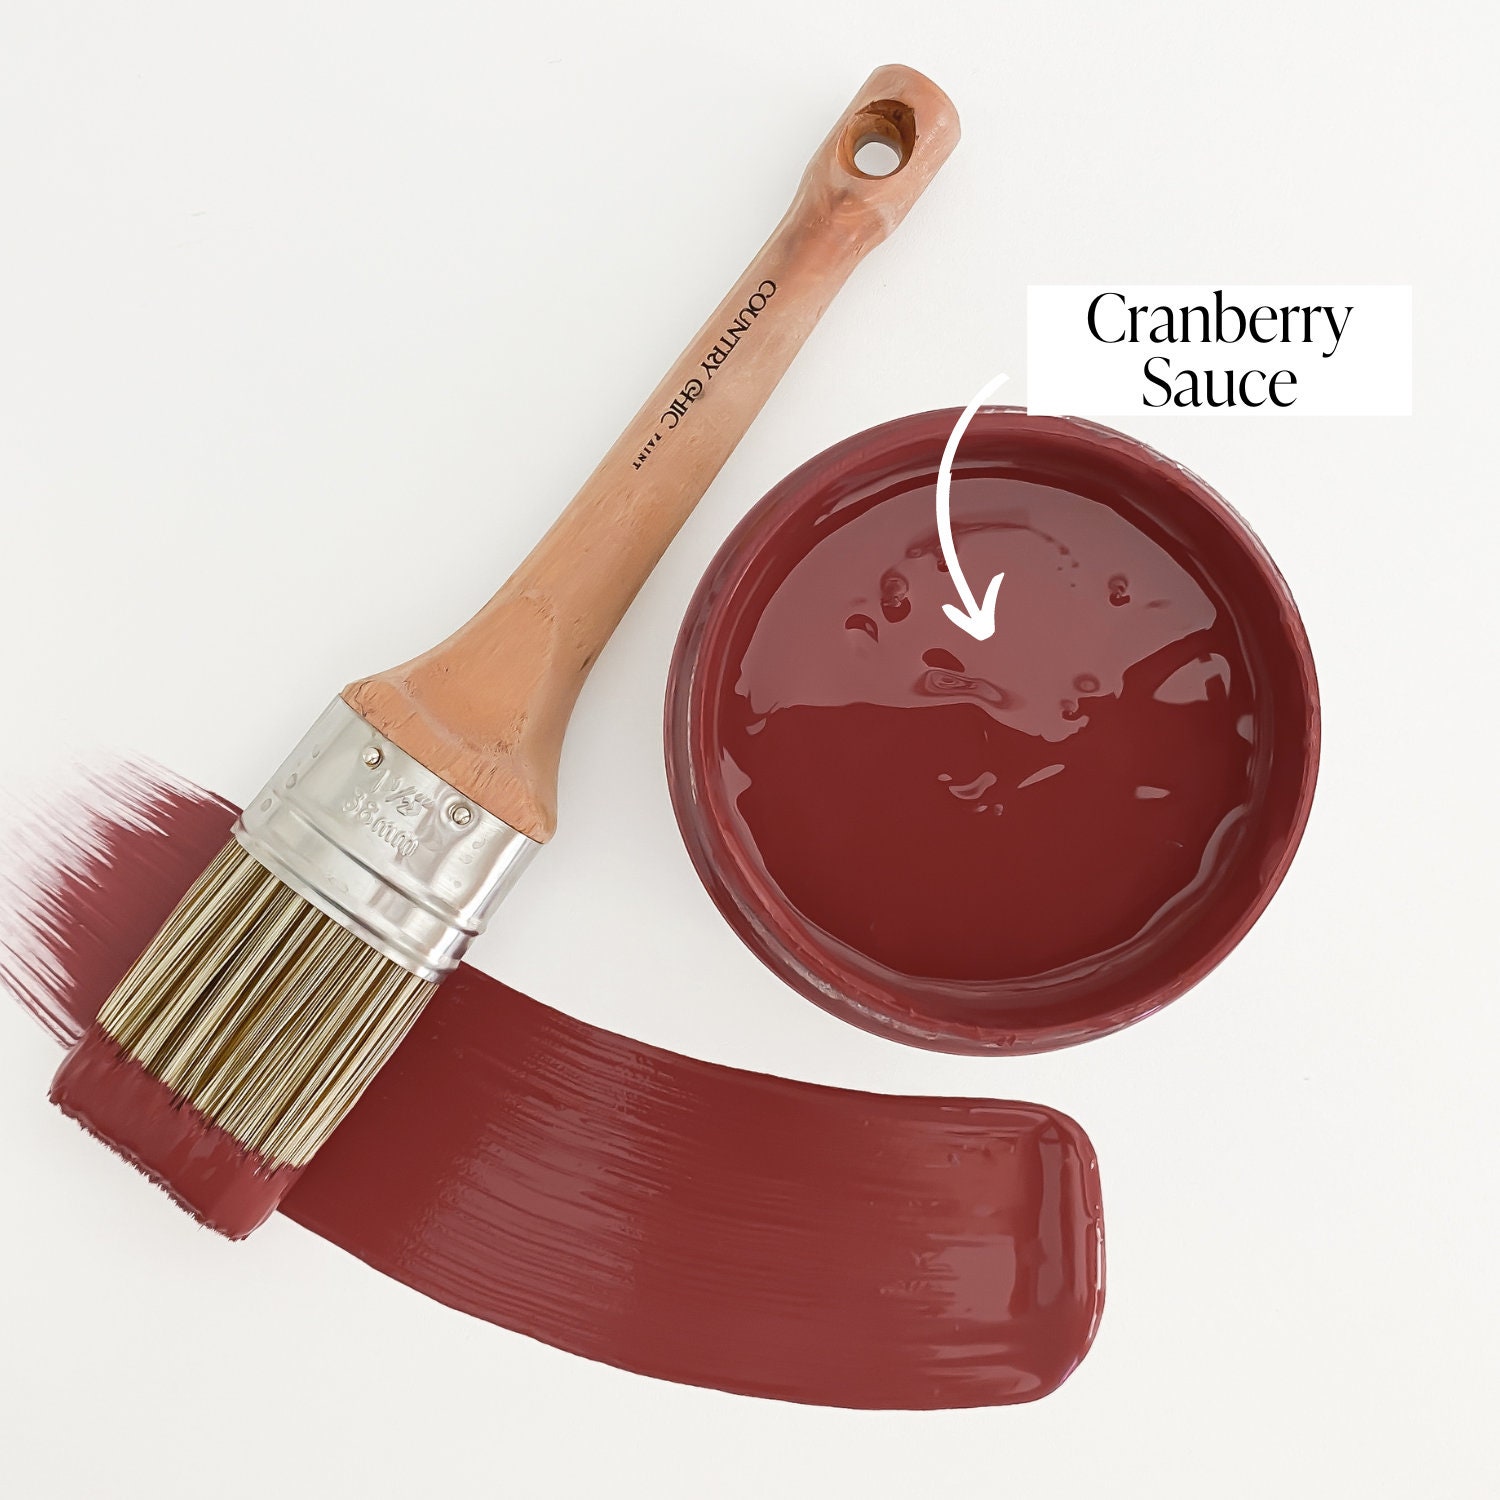 Cranberry Sauce Chalk Style Paint for Furniture, Home Decor, DIY